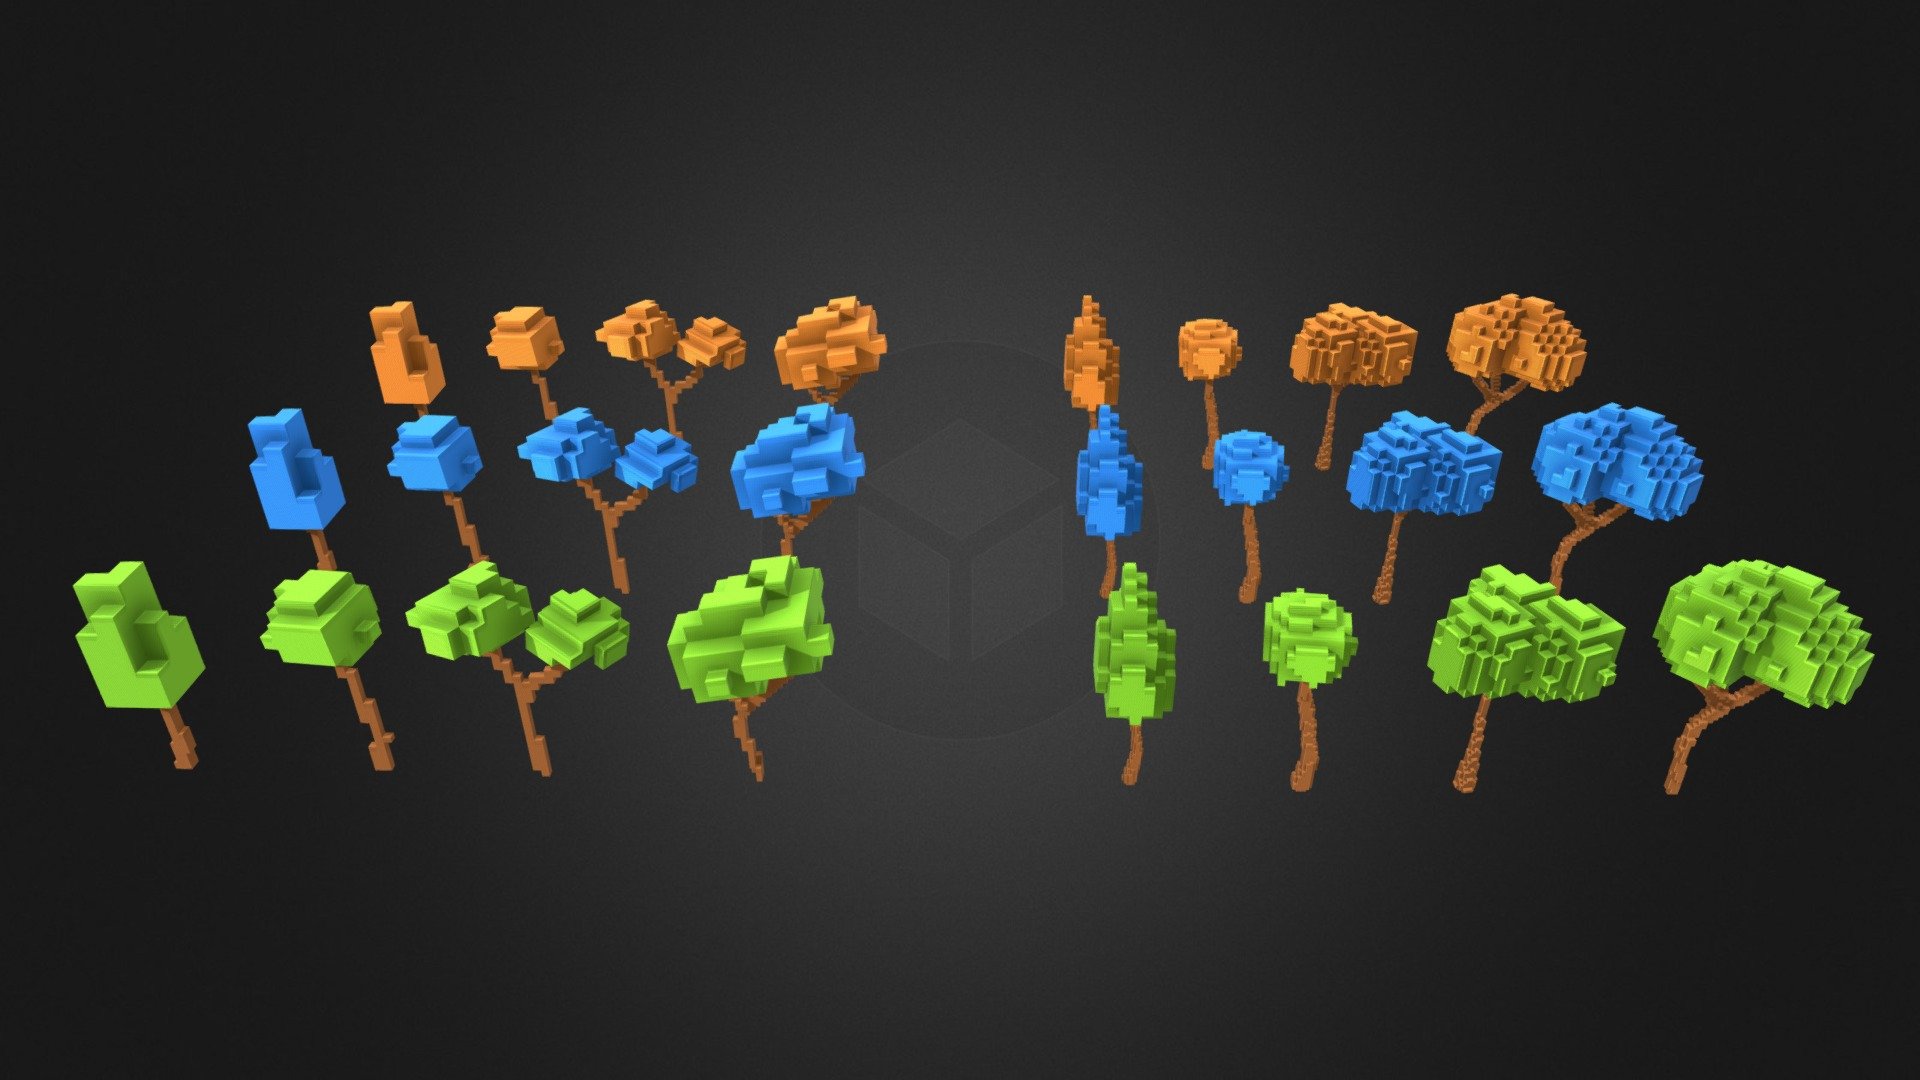 This is a Voxel Tree pack containing x8 unique models with x3 colour variants.

[Contents]

x4 blocky type trees
x4 voxel trees

[Colours]

green, blue, orange

SimplePolygon Discord
https://discord.gg/8WSpWnGH4b

[Licence] Not to resell model, can sell commercially in end project/game

Credit myself, SimplePolygon

If you have any further questions I will be happy to answer 3d model